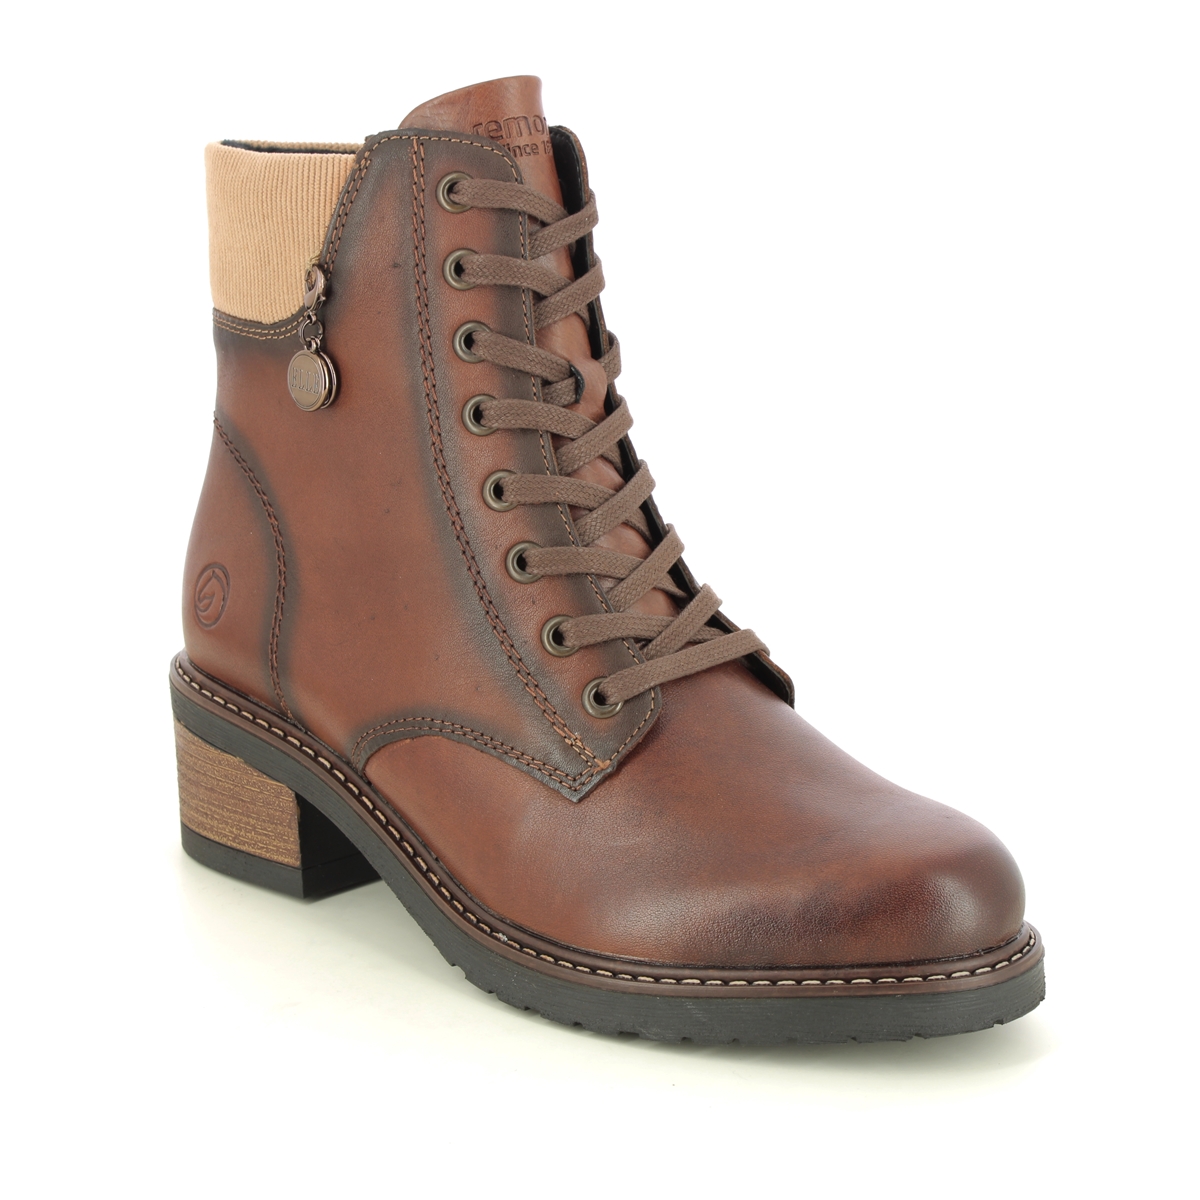 Remonte Menarem Elle Brown Leather Womens Lace Up Boots D1A70-22 In Size 37 In Plain Brown Leather